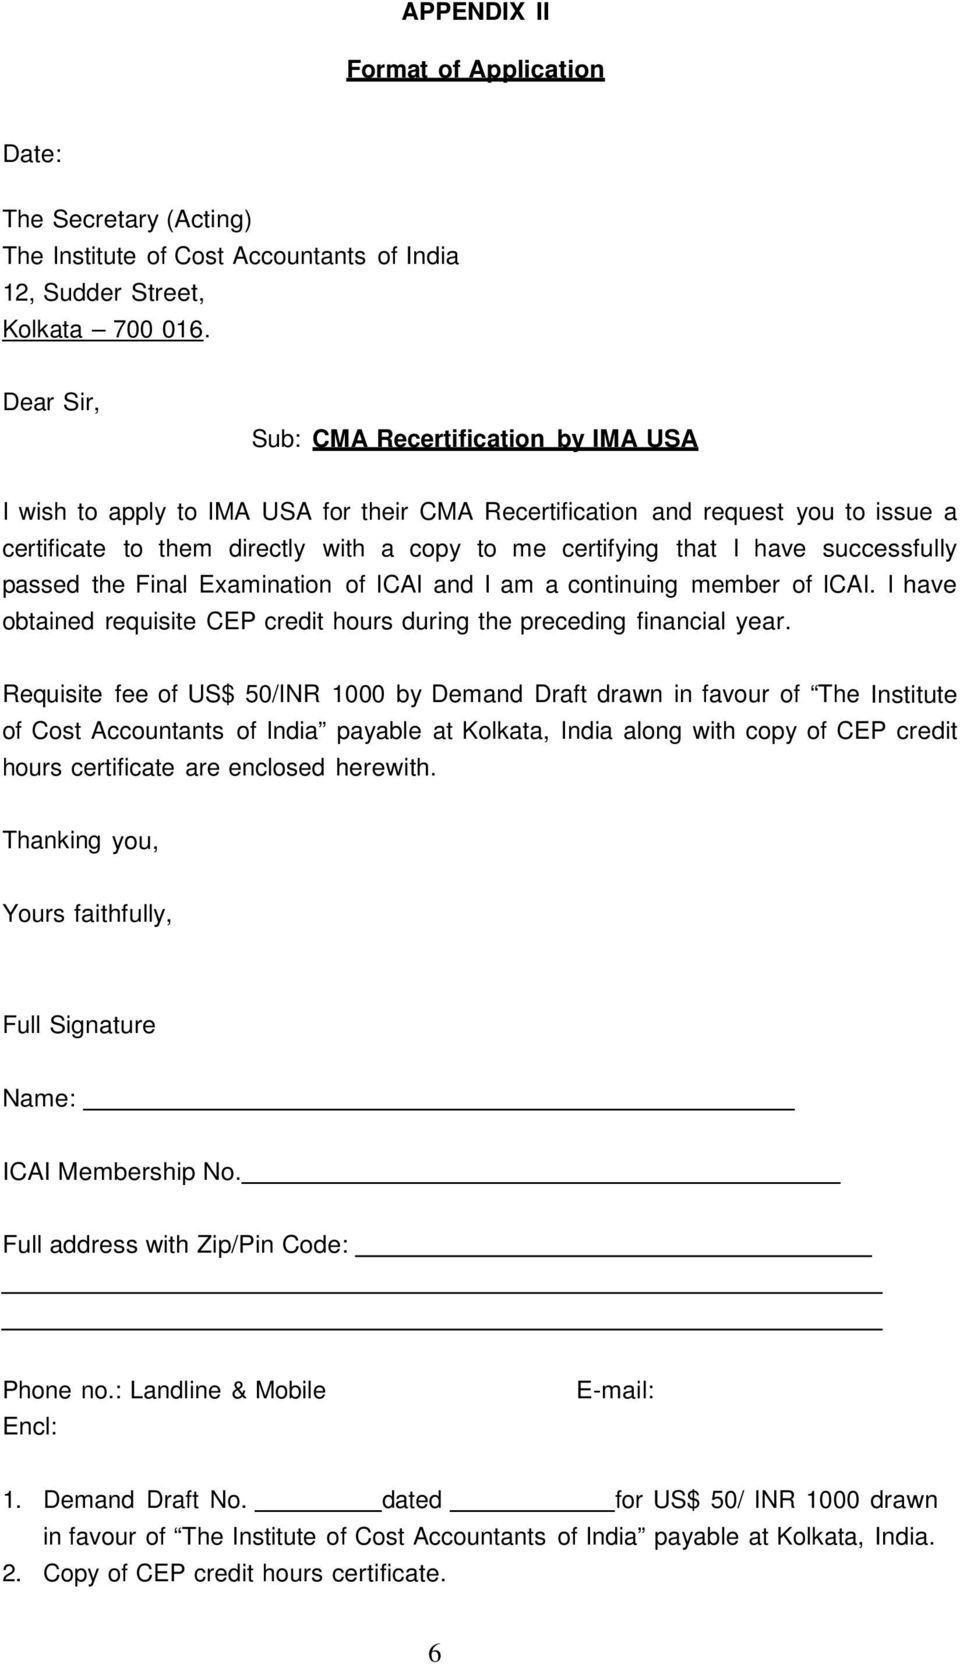 Procedure For Icai Members Acma Fcma To Get Cma Certification Recertification Of Ima Usa Pdf Free Download